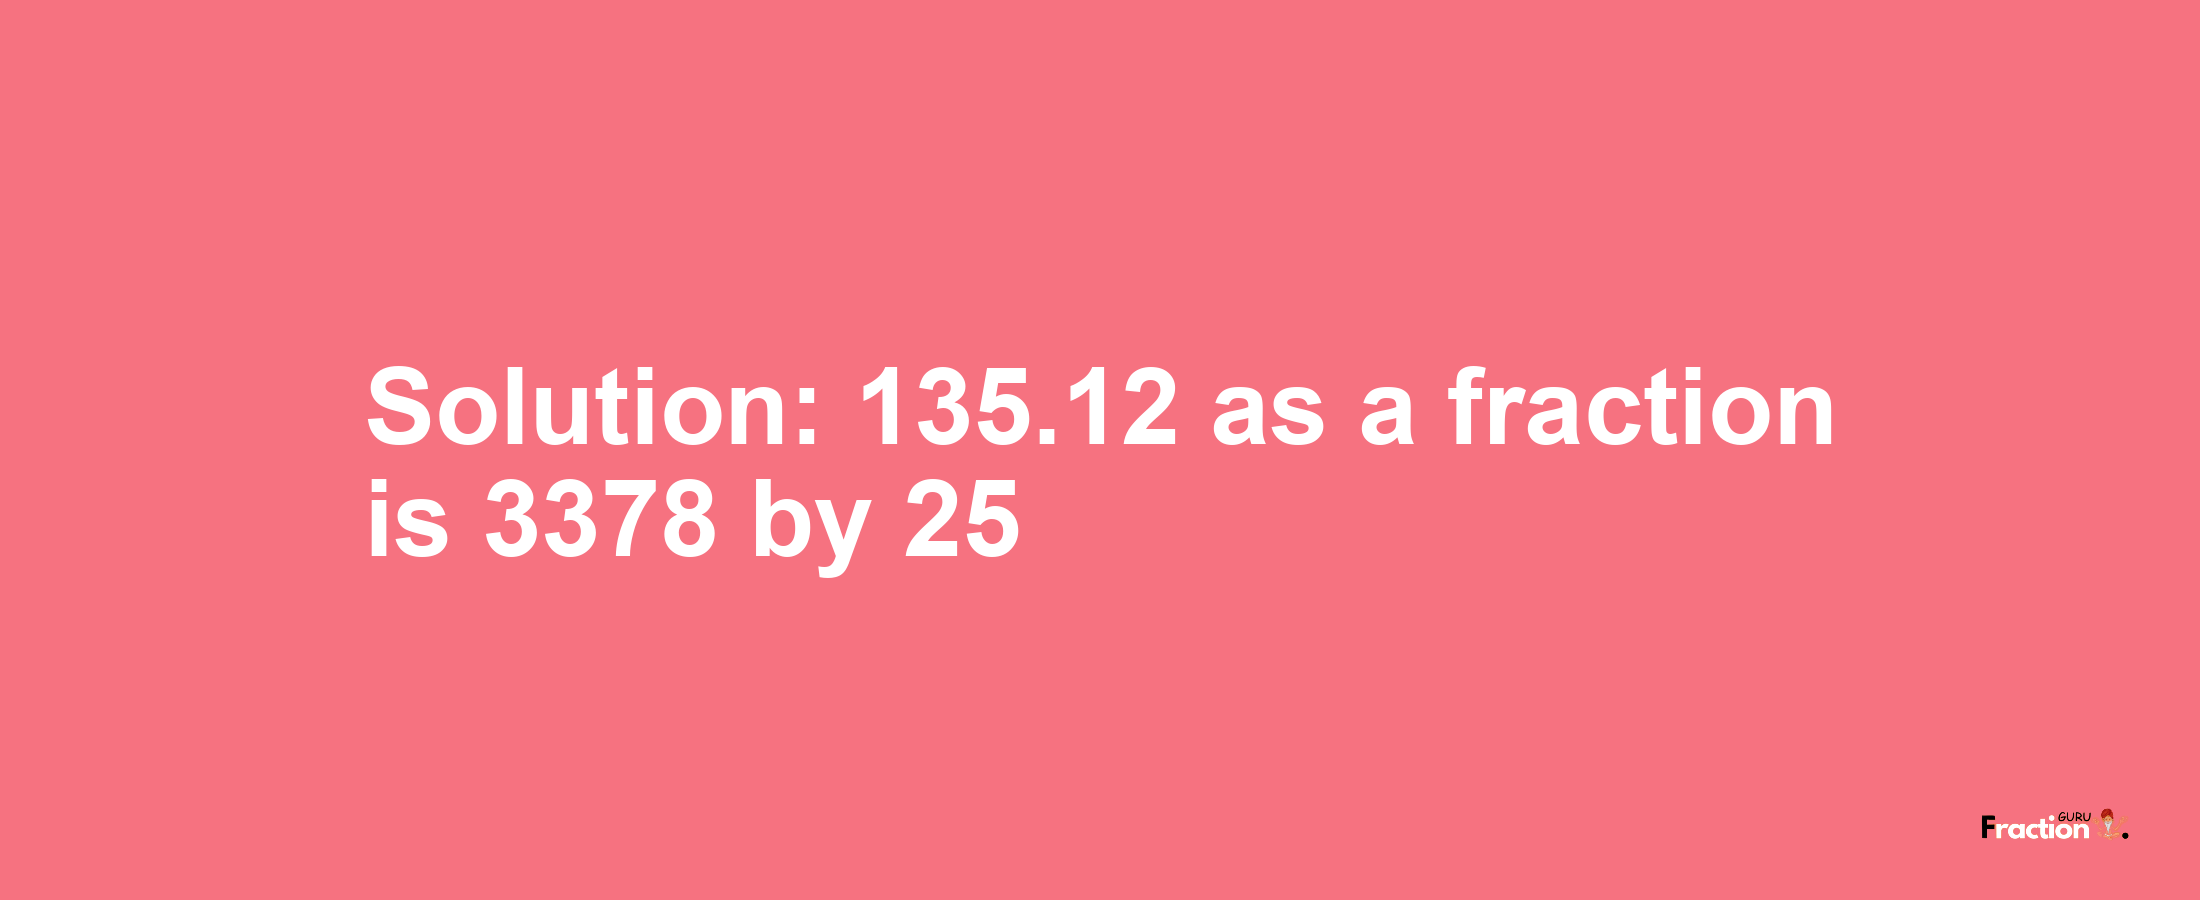 Solution:135.12 as a fraction is 3378/25